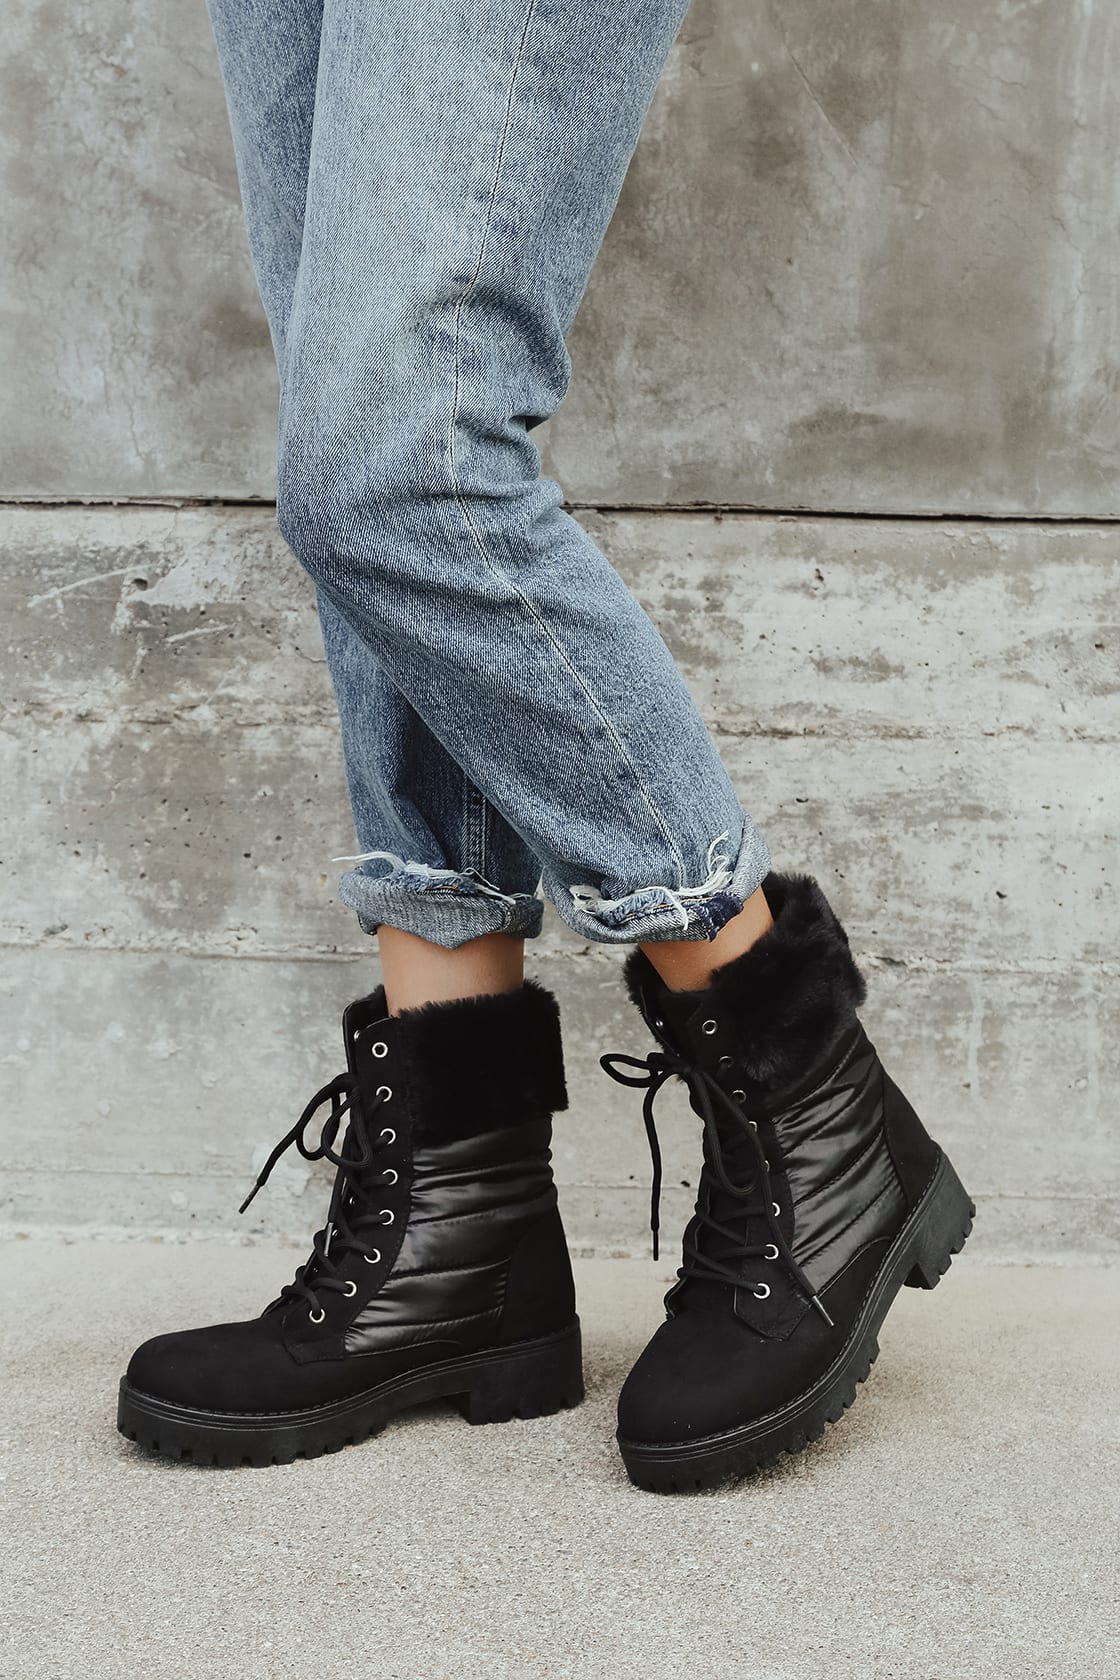 Black Suede Boots - Faux Fur Lace-Up Boots - Mid-Calf Boots - Lulus